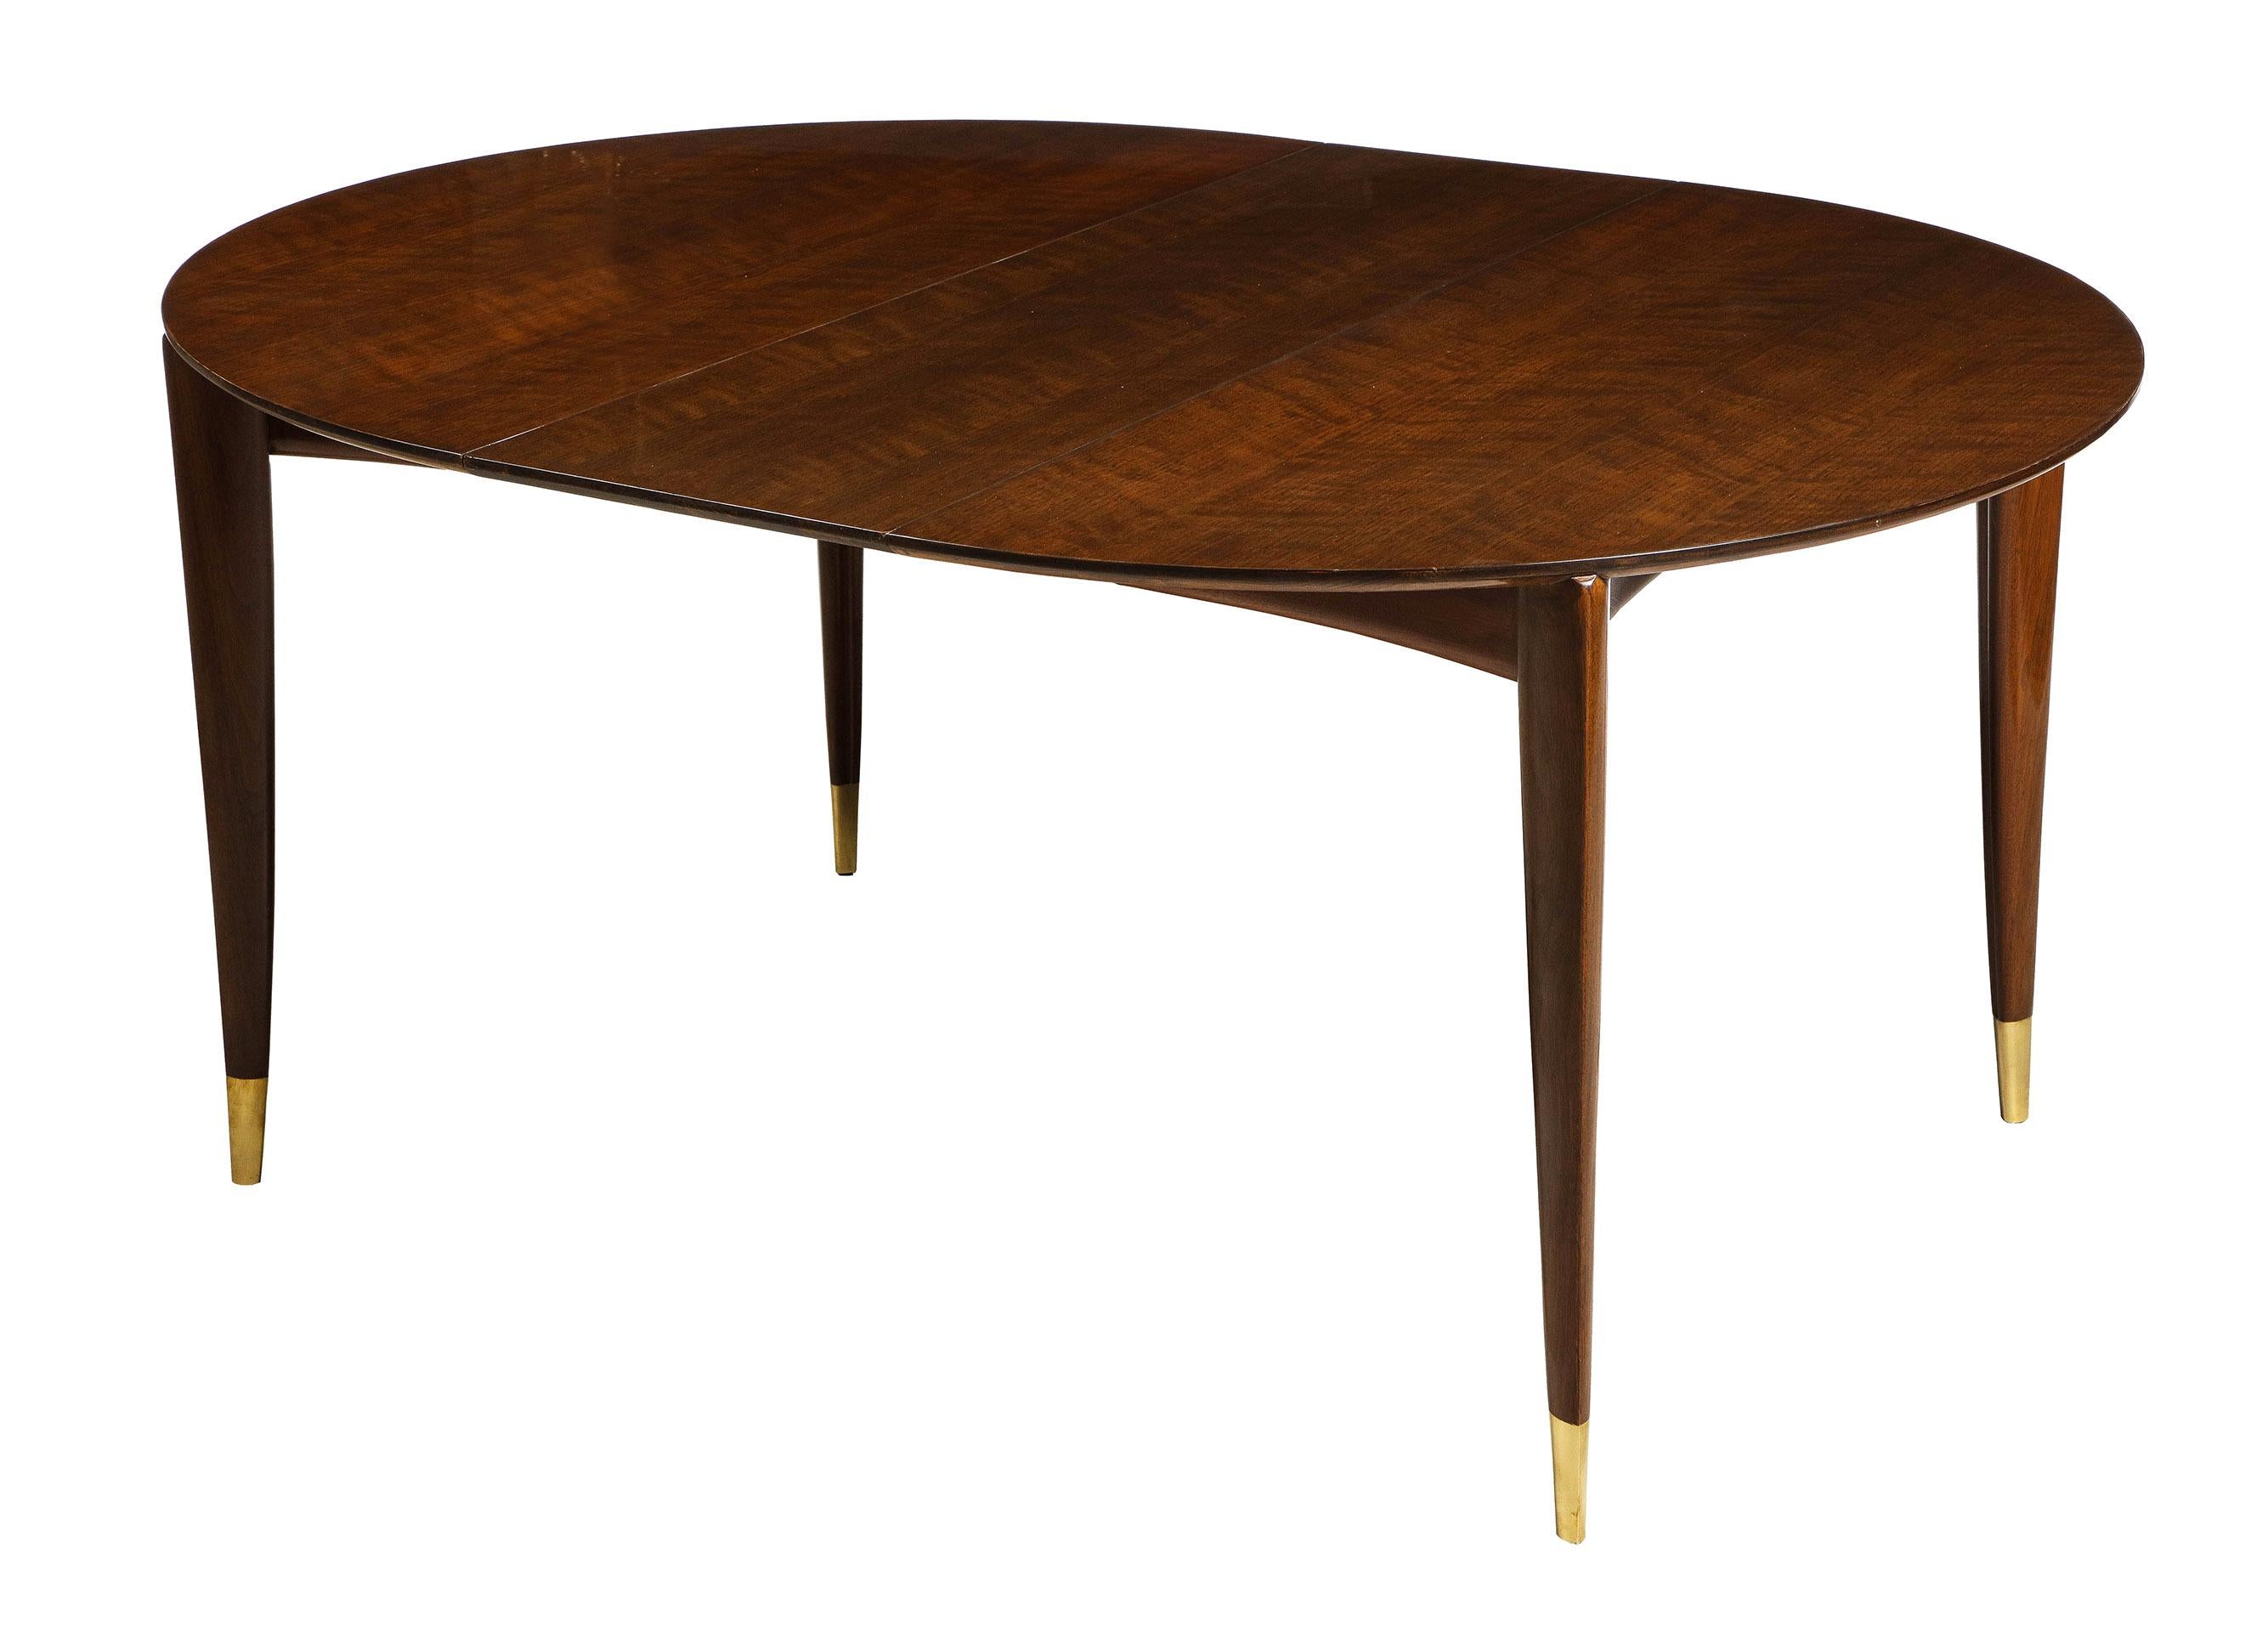 Having a lovely lacquer finish, the walnut dining table for M. Singer and Sons, starts as a round breakfast size table and expands to accommodate 10-12 chairs. The lovely grained top over a slightly concave apron. With 4 tapered legs with brass